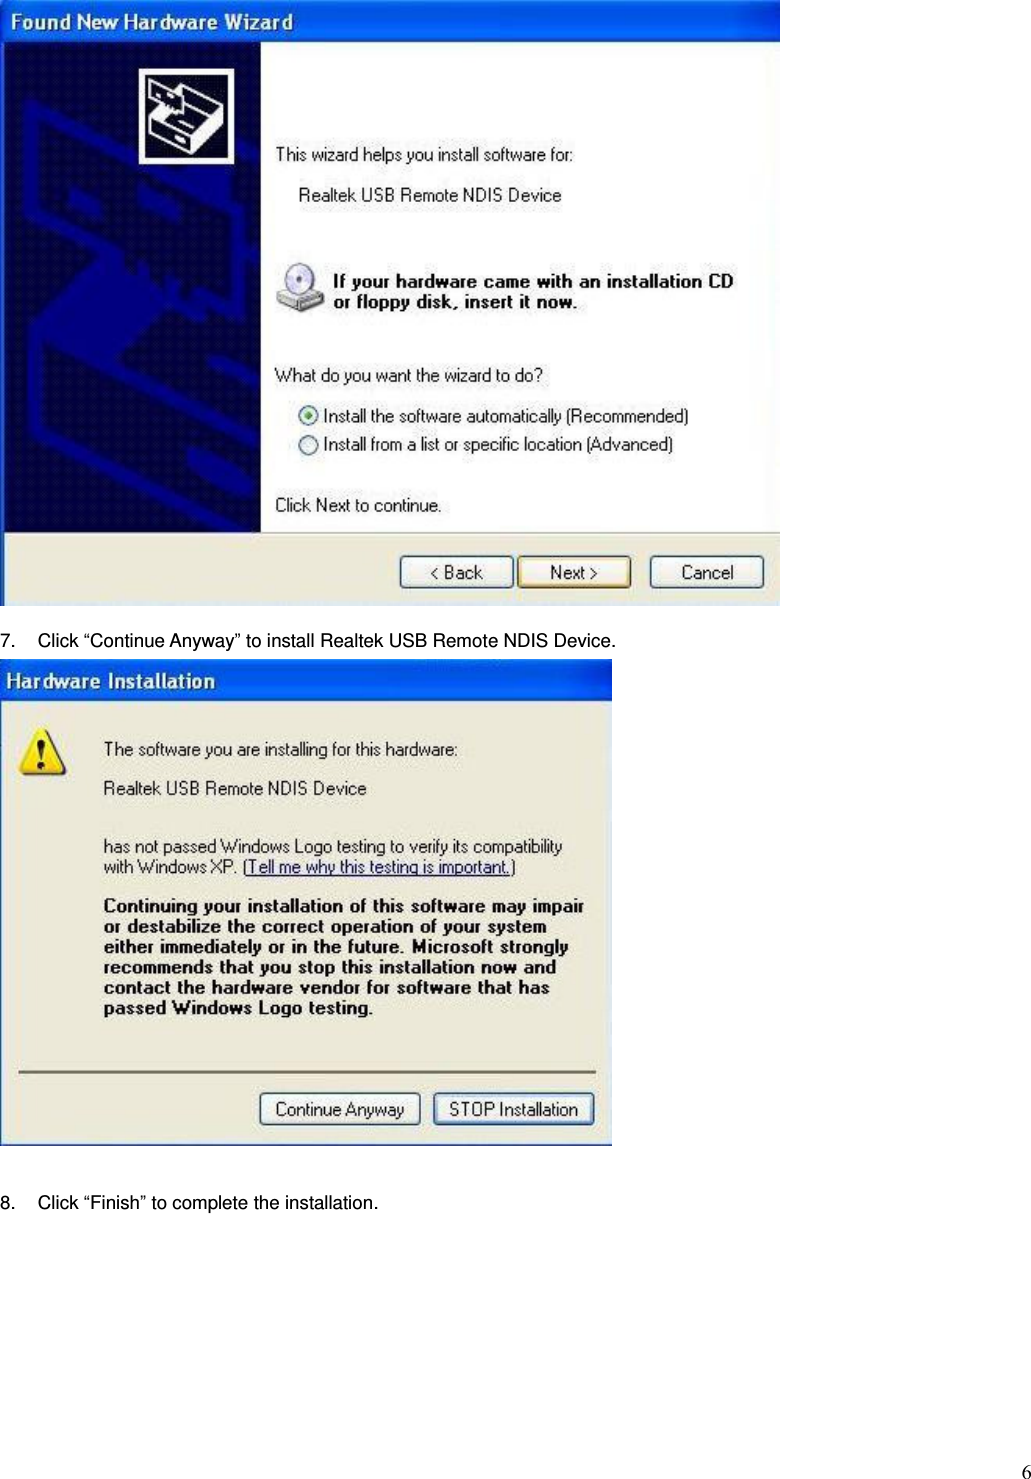  6  7.  Click “Continue Anyway” to install Realtek USB Remote NDIS Device.   8.  Click “Finish” to complete the installation. 